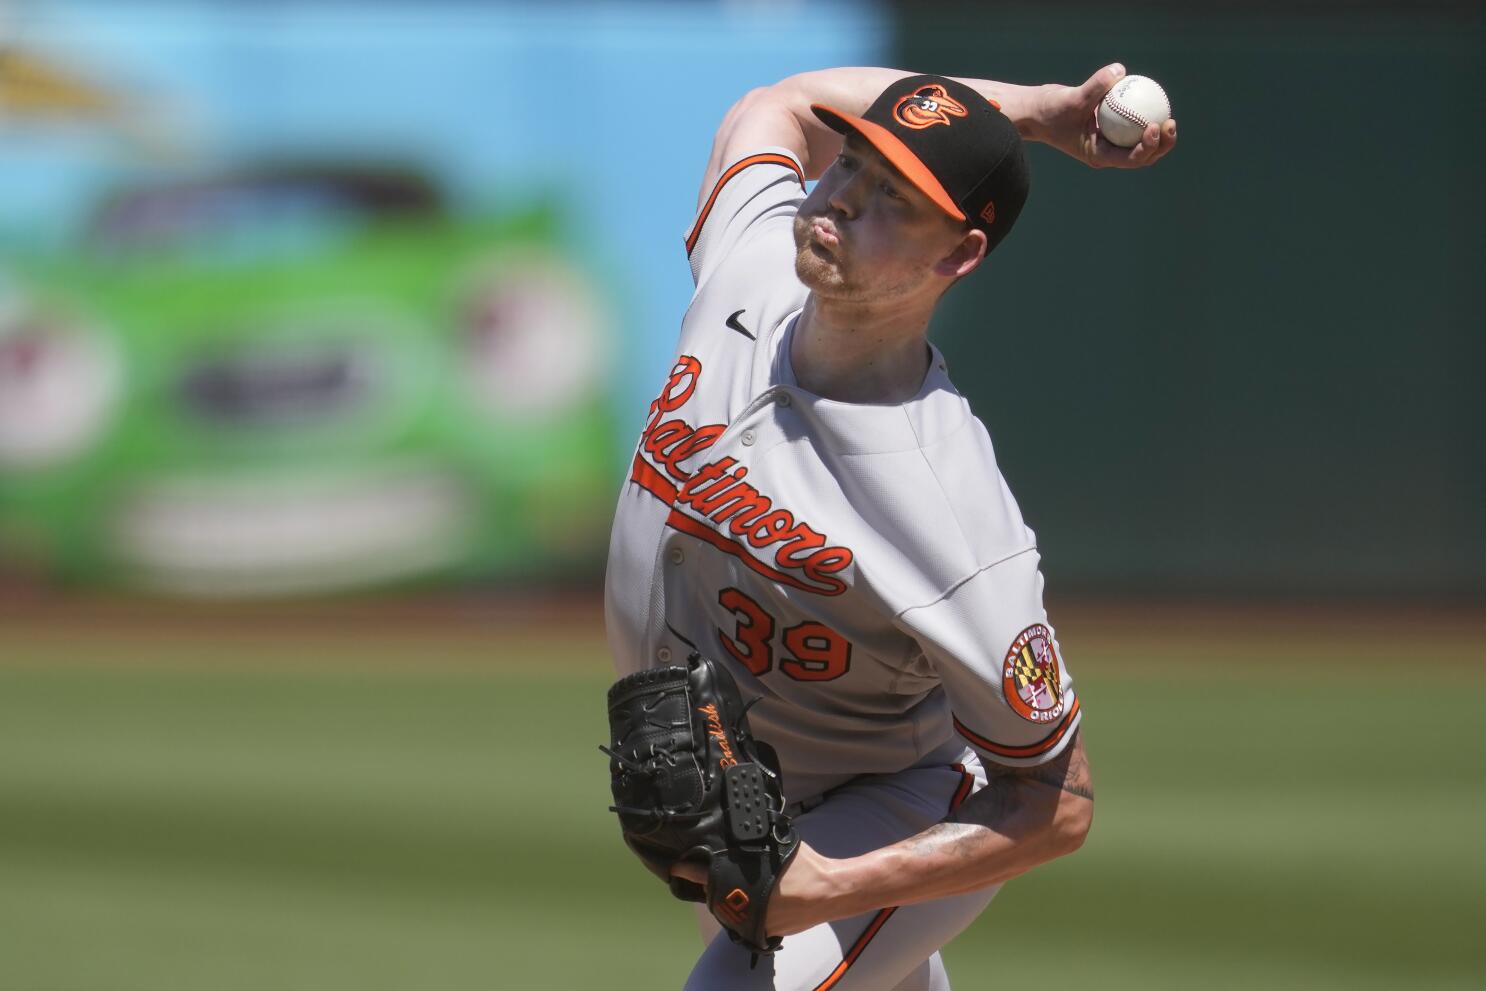 Orioles hit 3 HRs, ride Bradish gem to 12-1 win over A's - The San